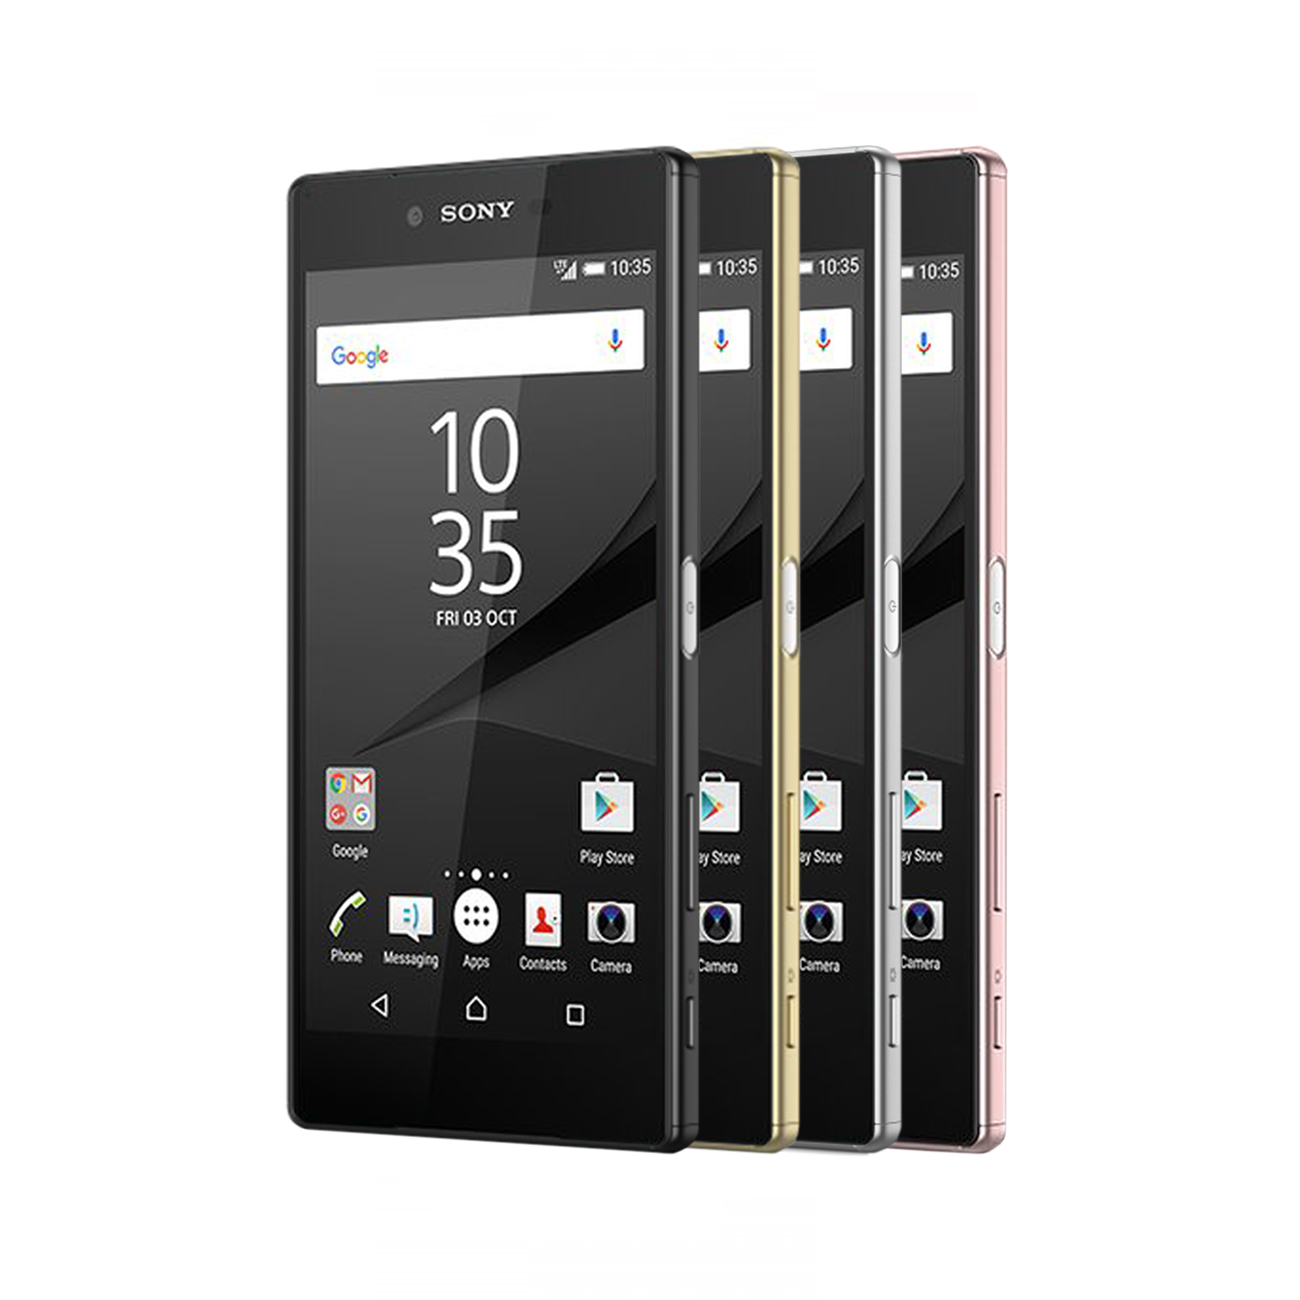 Sony Xperia Z5 Compact REVIEW: Should you buy it?